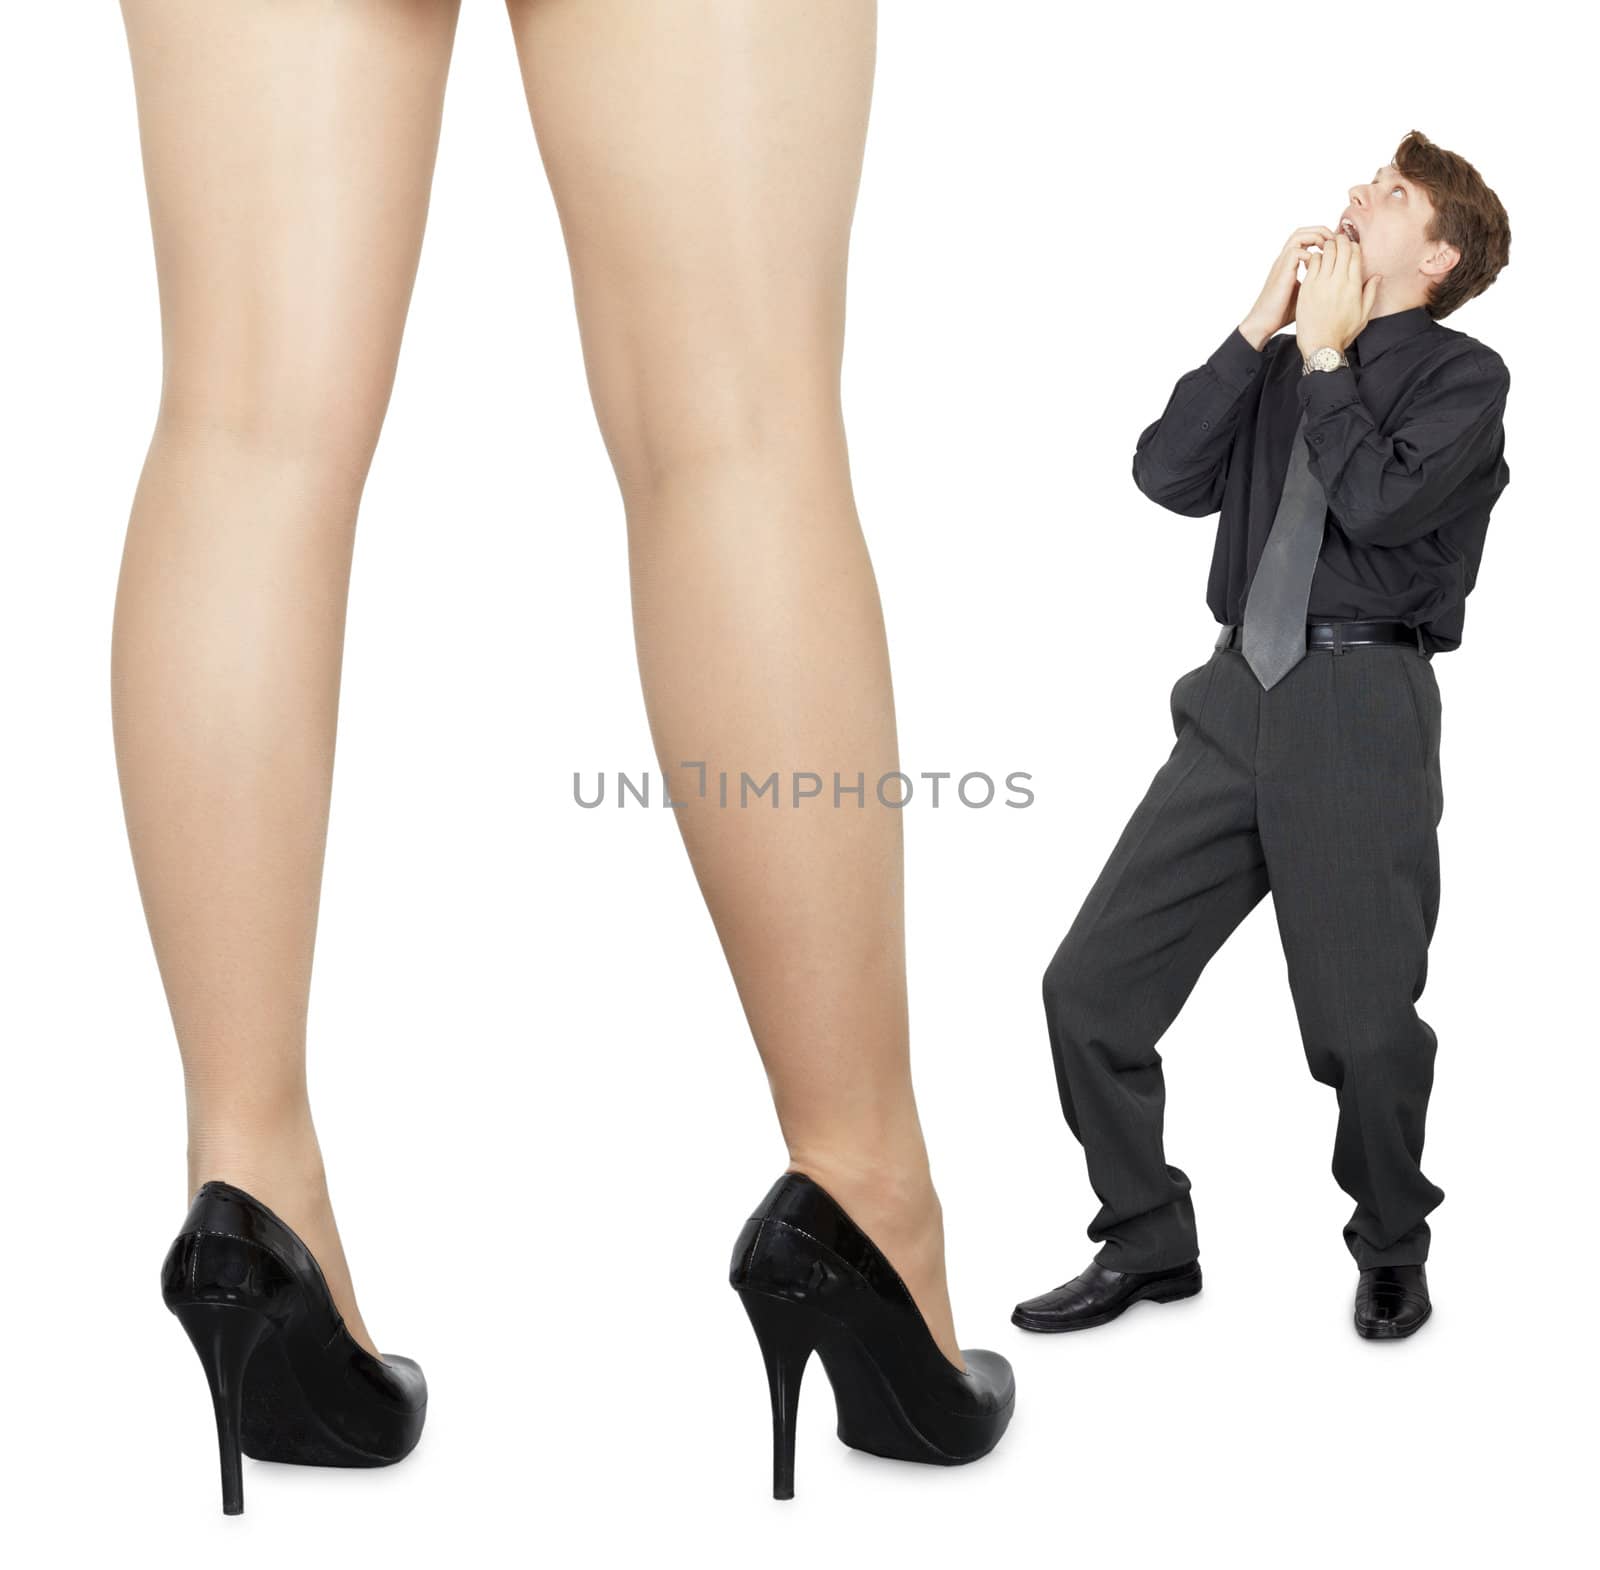 The little man is shocked by the appearance of big women isolated on white background